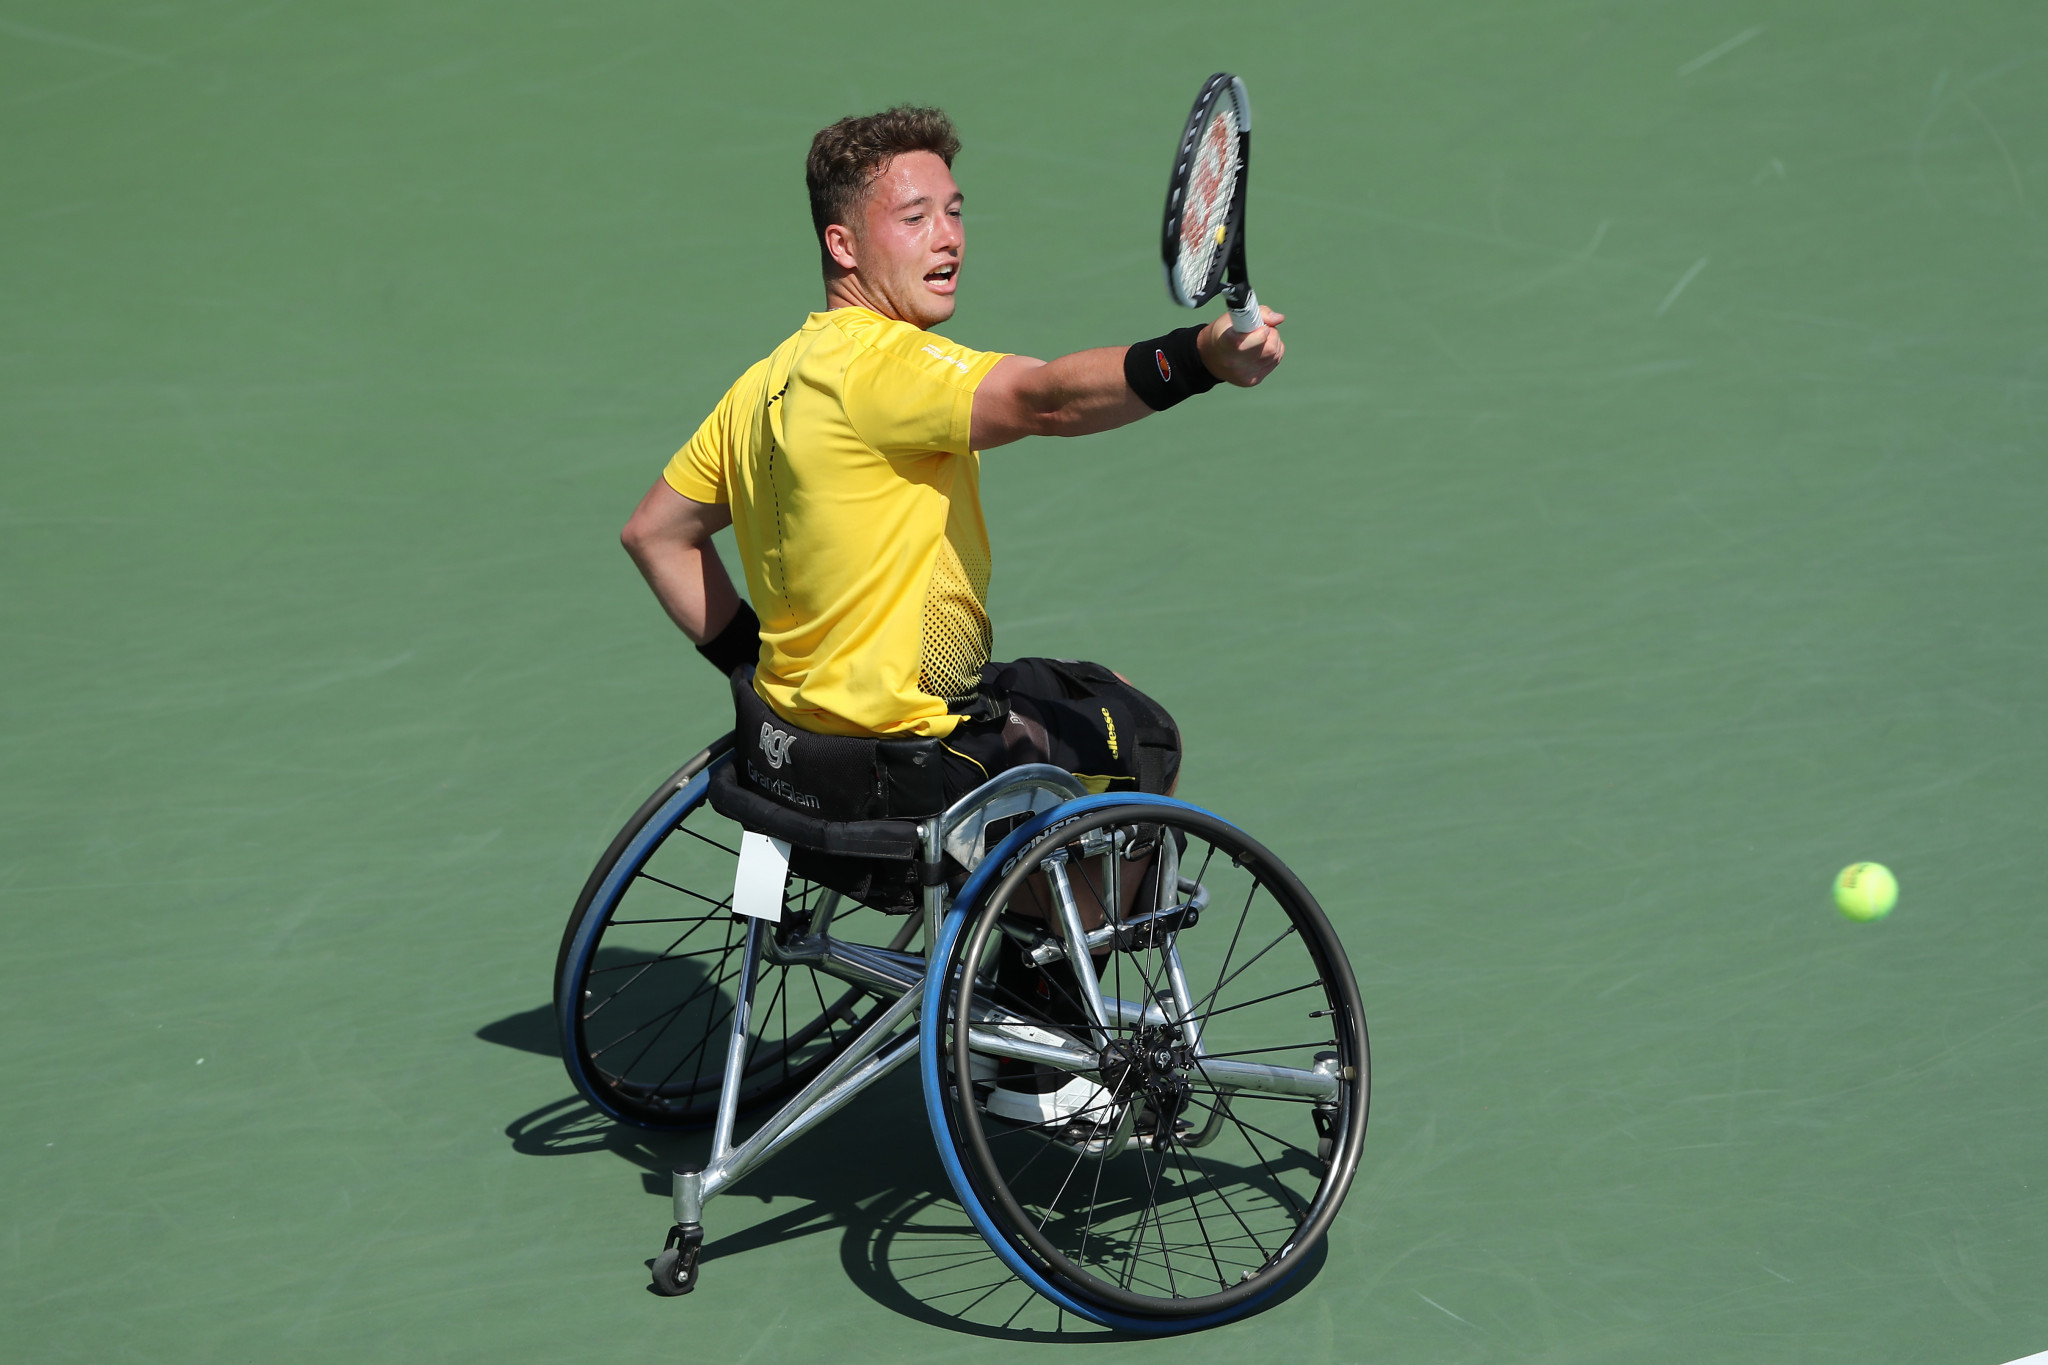 Great Britain's Alfie Hewett beat France's Stéphane Houdet on day one of the NEC Wheelchair Singles Masters in Orlando ©Getty Images